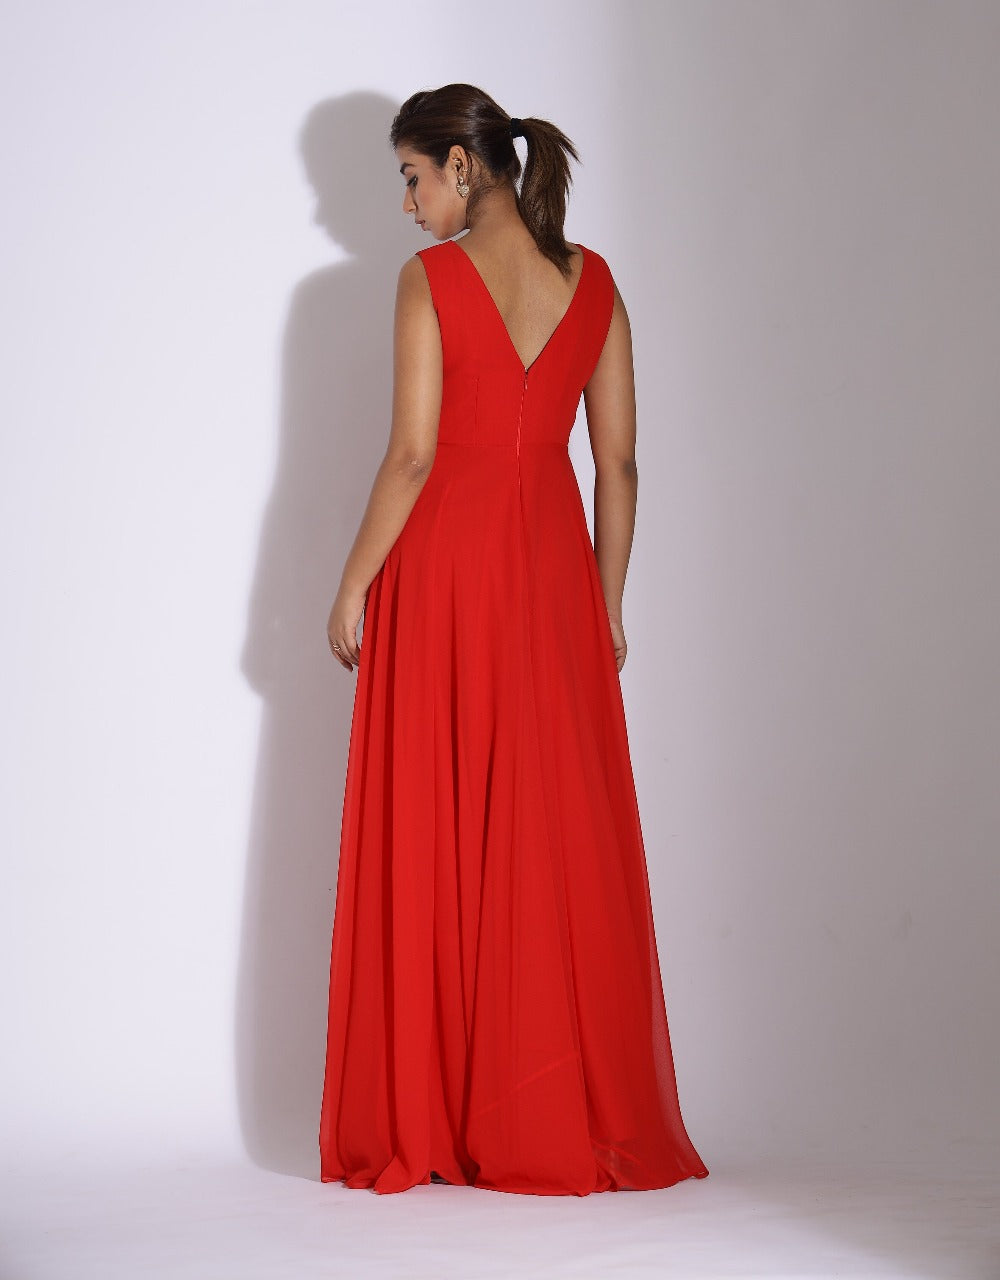 Red Cowl Neck Evening Gown, Evening Dress, Party Dress